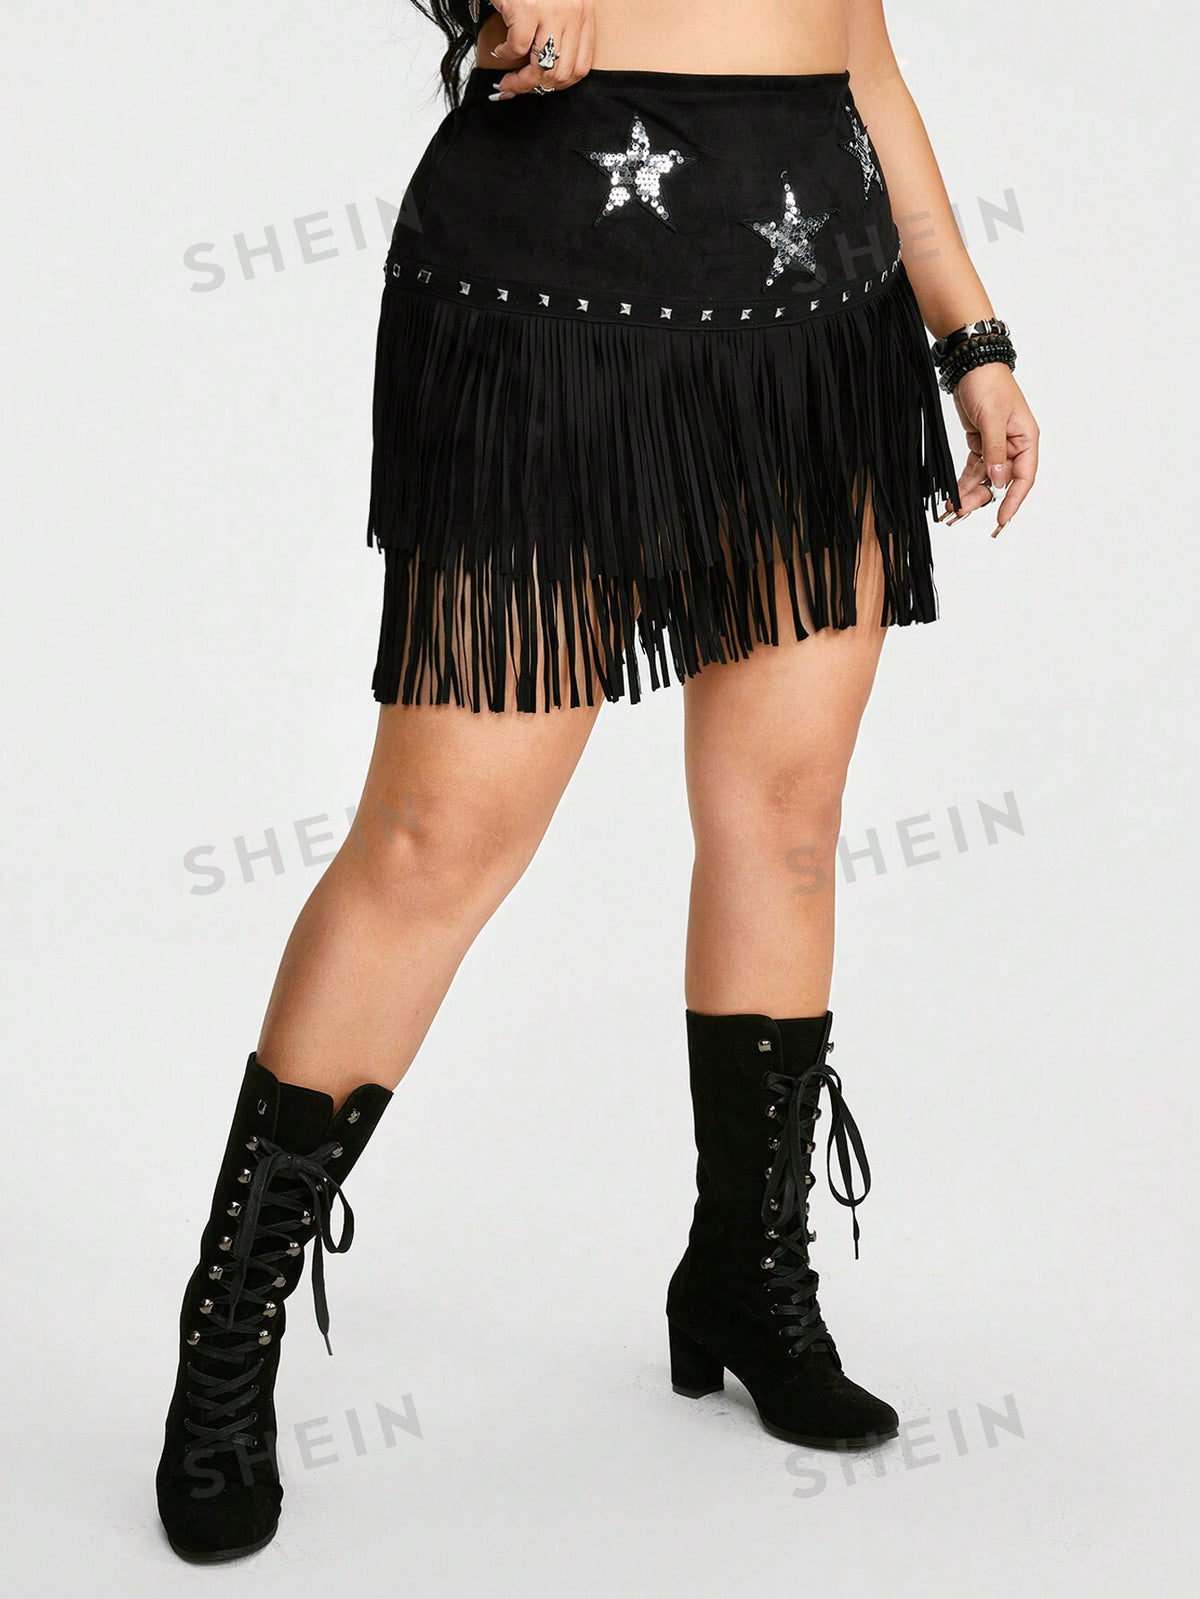 ROMWE Grunge Punk Plus Size Women's Vintage Western Holiday Style Double-Tiered Tassel Hem Shorts With Star & Sequin Ornament